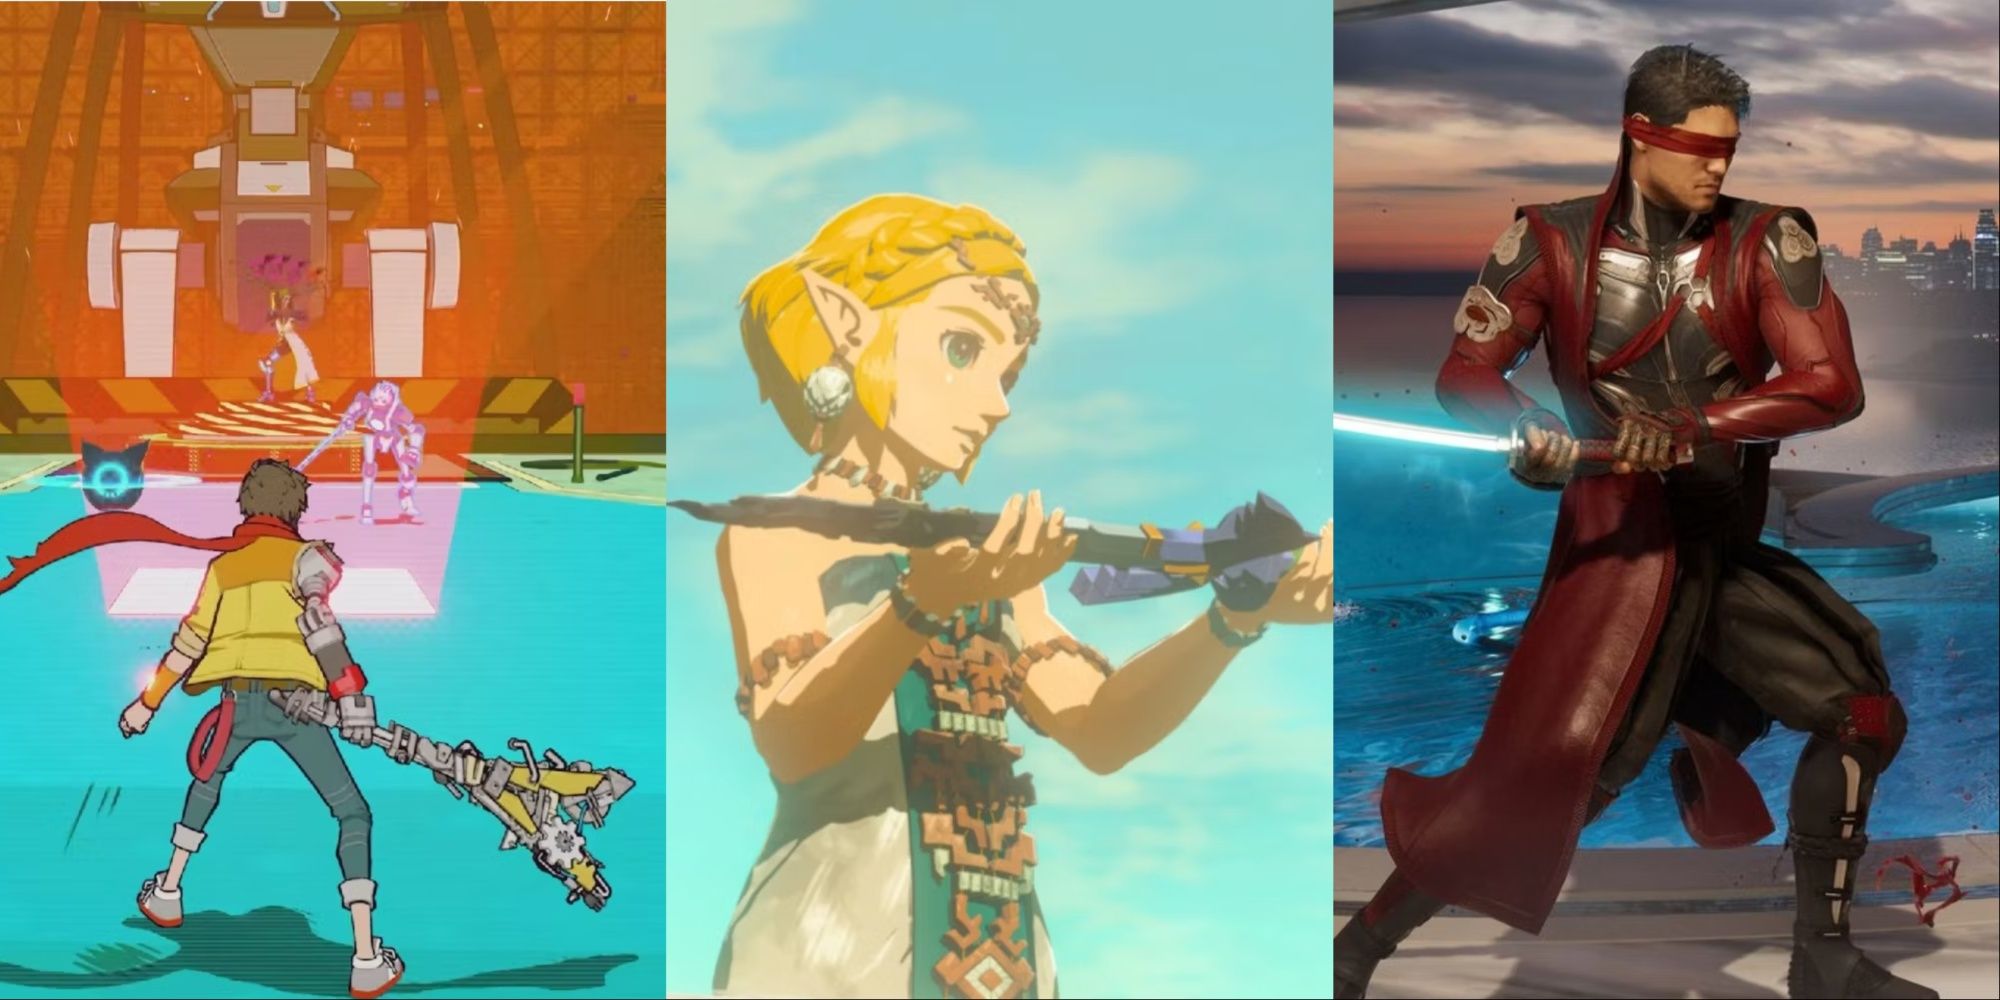 A split image showing chais guitar Hi-Fi Rush, Zelda holding the master sword in The Legend of Zelda Tears of the Kingdom, and Kenshi with sword Mortal Kombat 1.